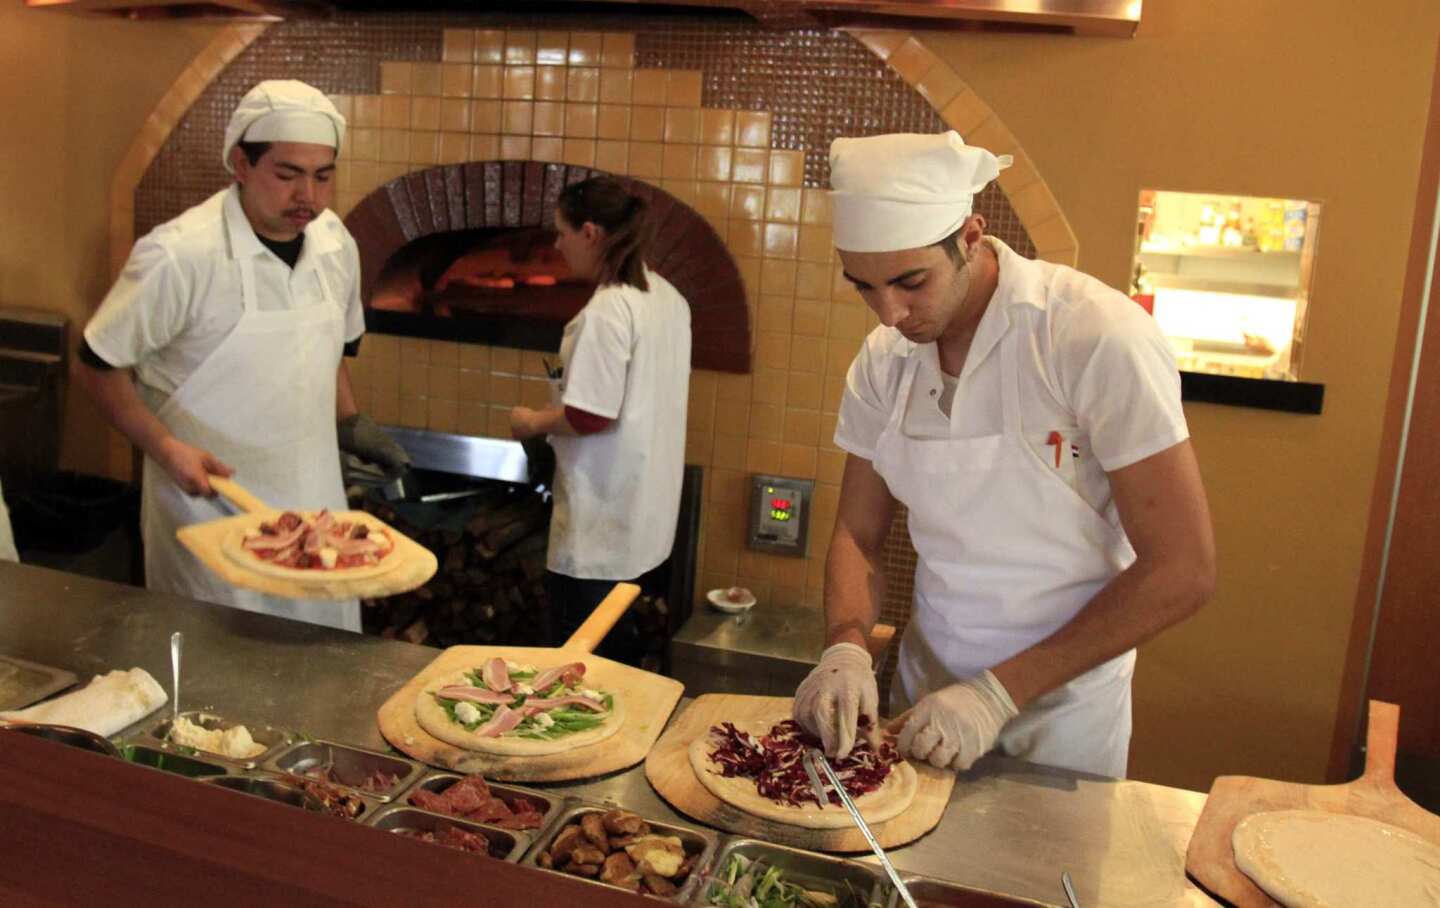 Pizzas are prepared in a wood-burning oven.